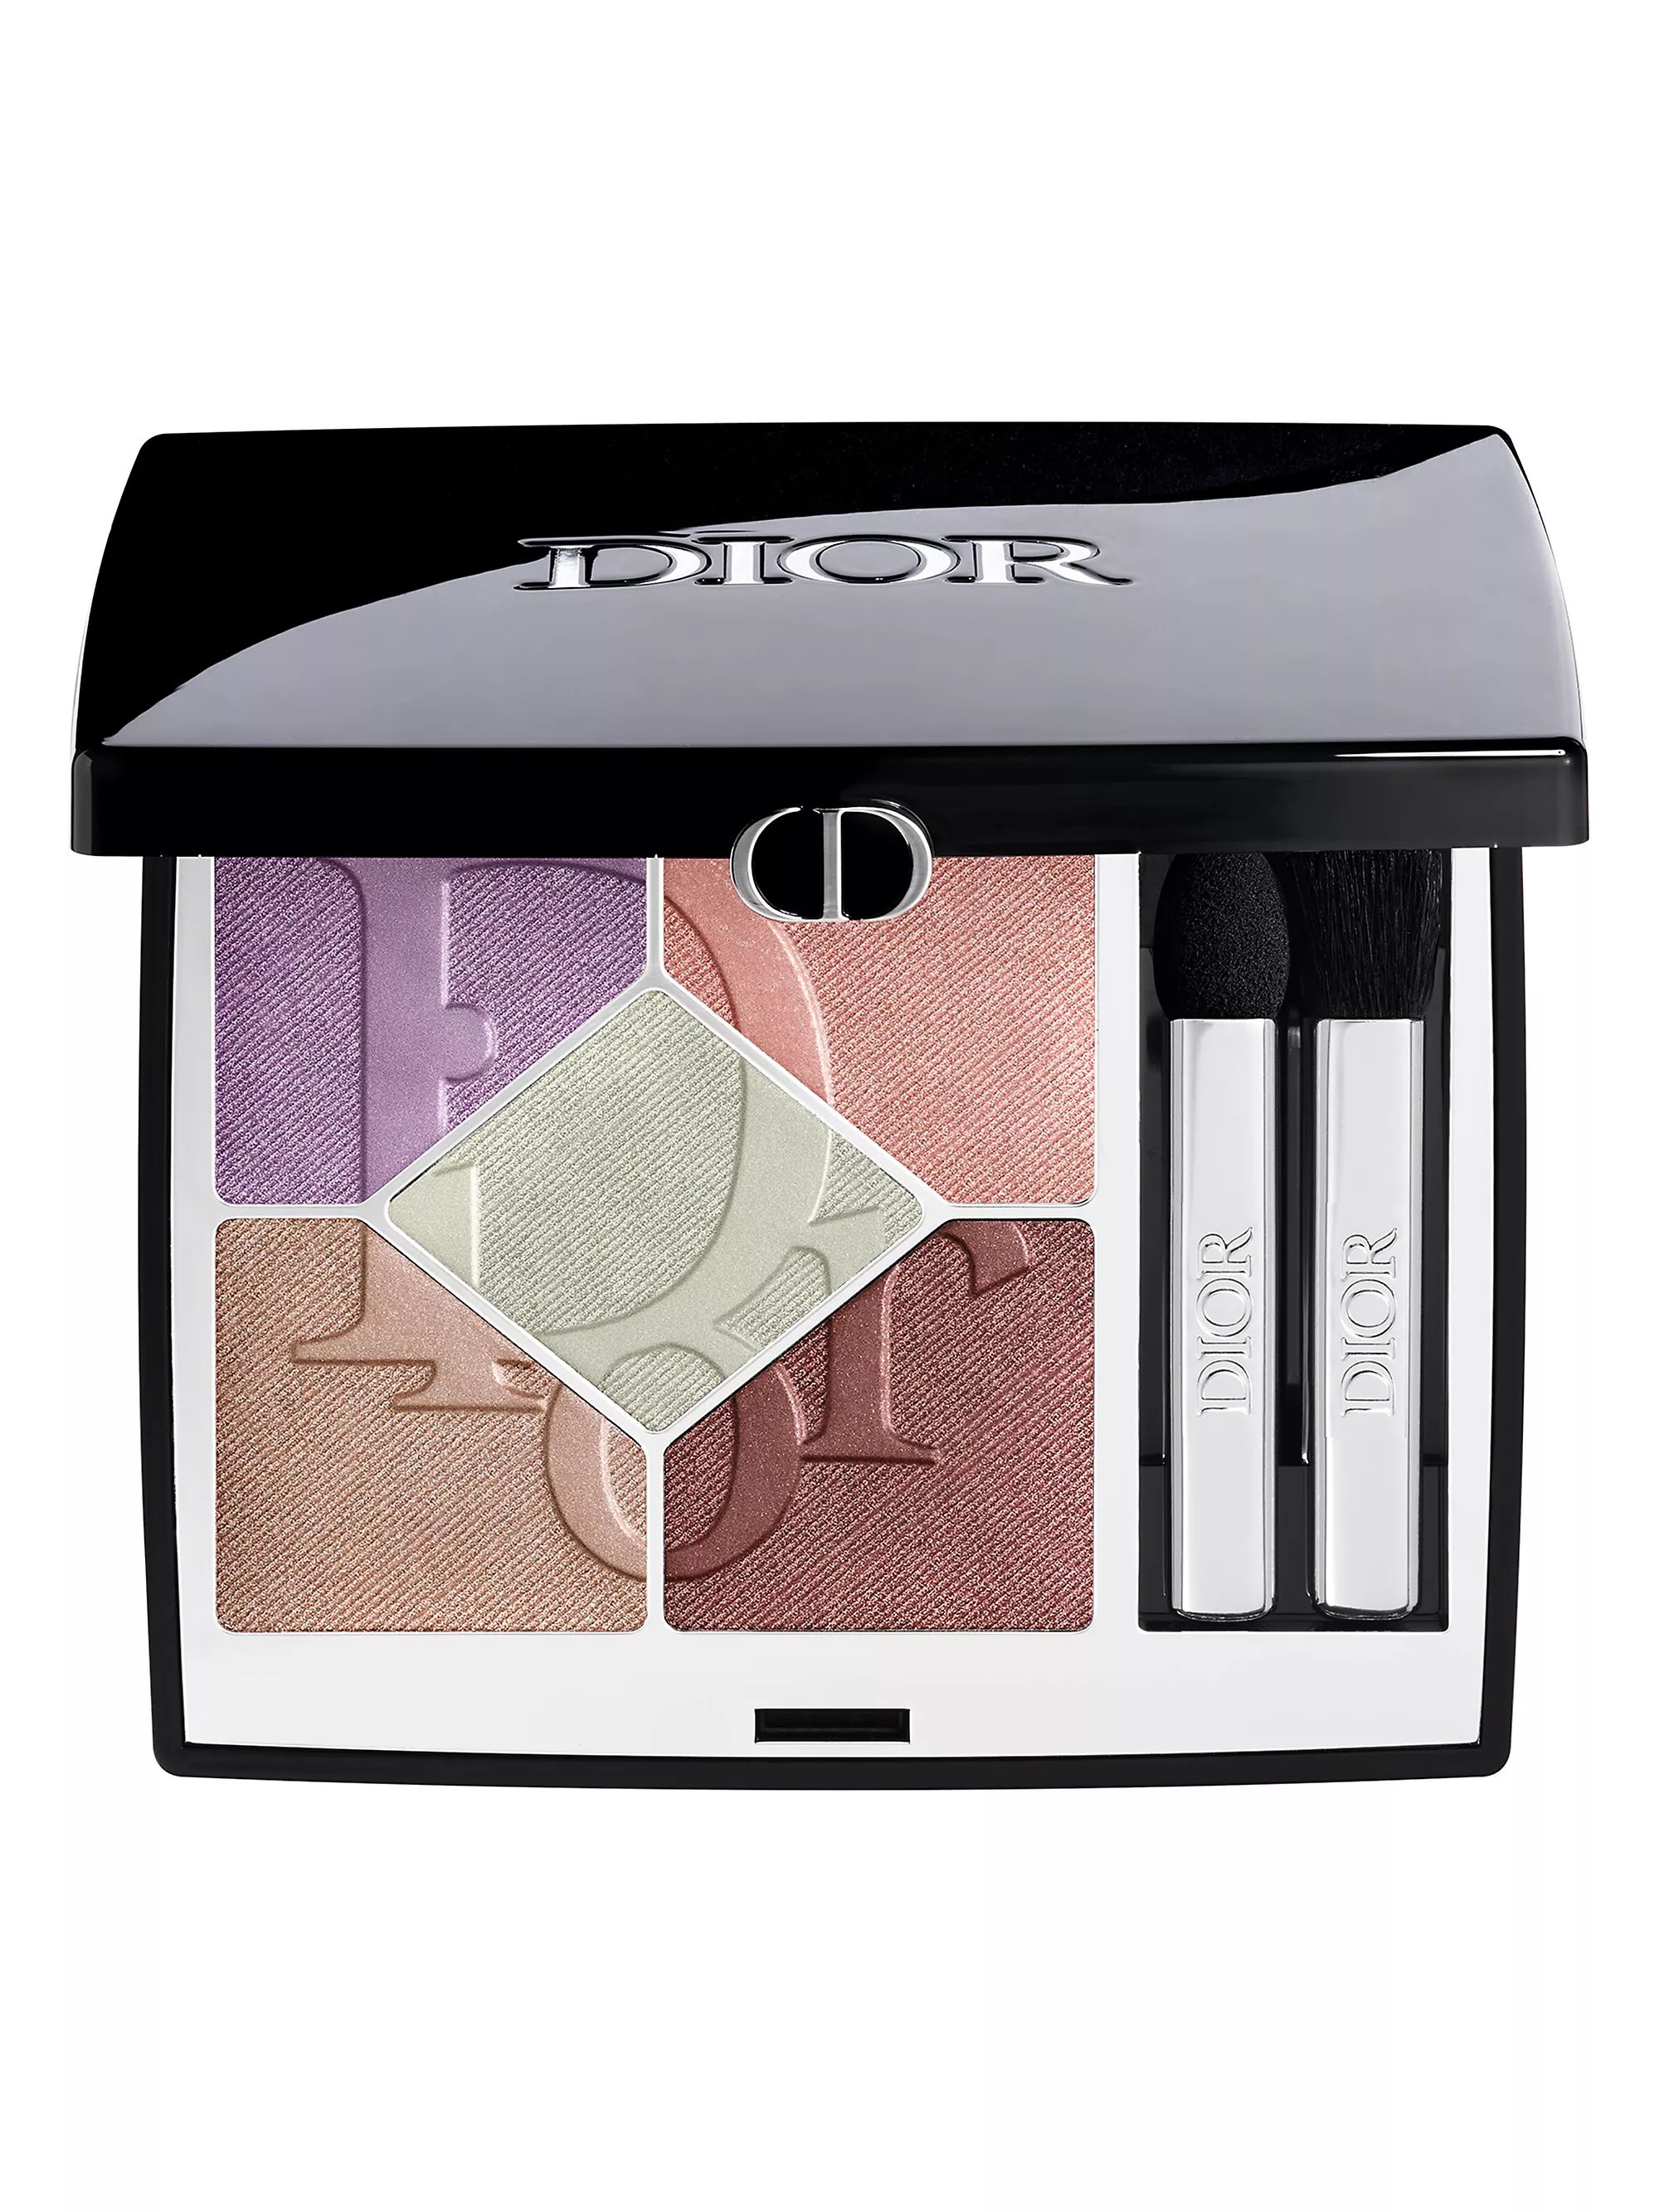 Diorshow 5 Colors Limited-Edition Eye Palette | Saks Fifth Avenue